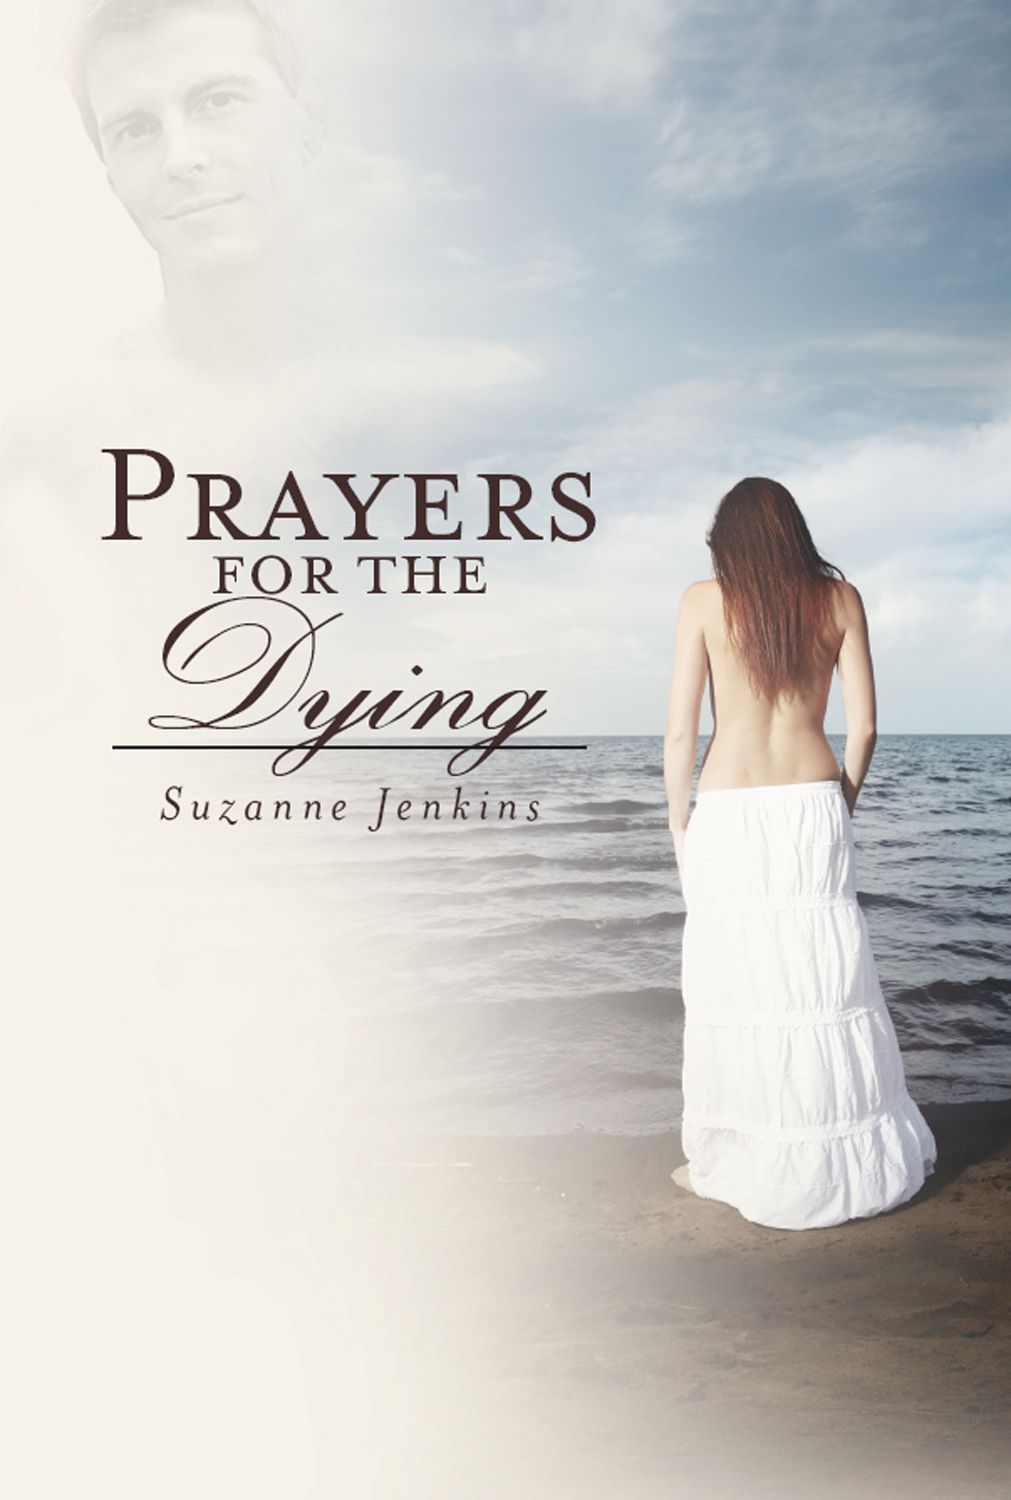 Prayers for the Dying (Pam of Babylon Book Four)